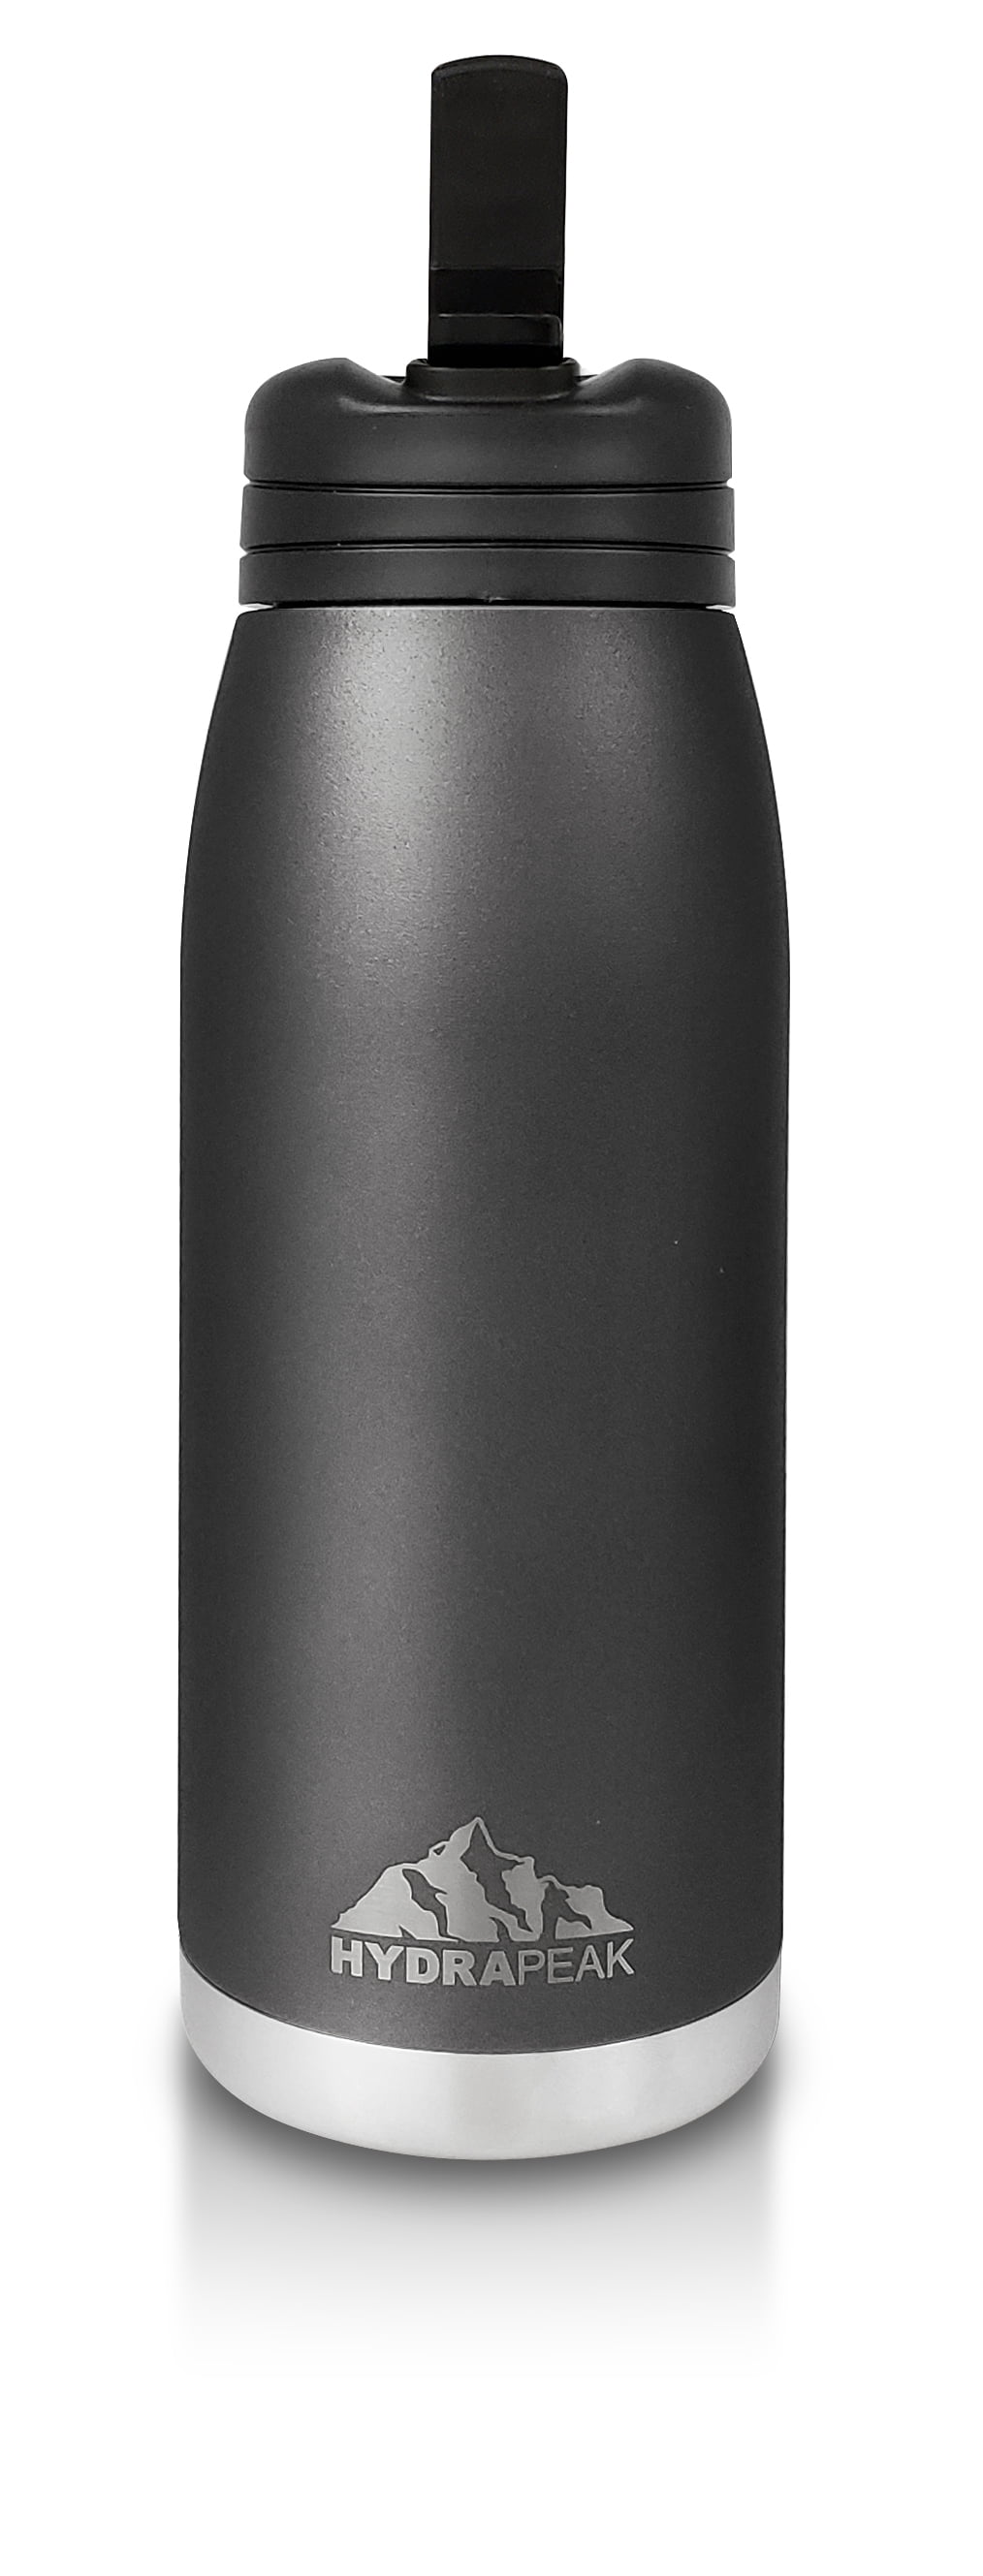 Hydrapeak FLOW 1L (32oz) Water Bottle BPA-Free Leak-Proof Double-Walled  Copper Coated Stainless-Steel Insulated Vacuum Flask with Integrated Bite  Value Straw and Crook Finger Handle … 